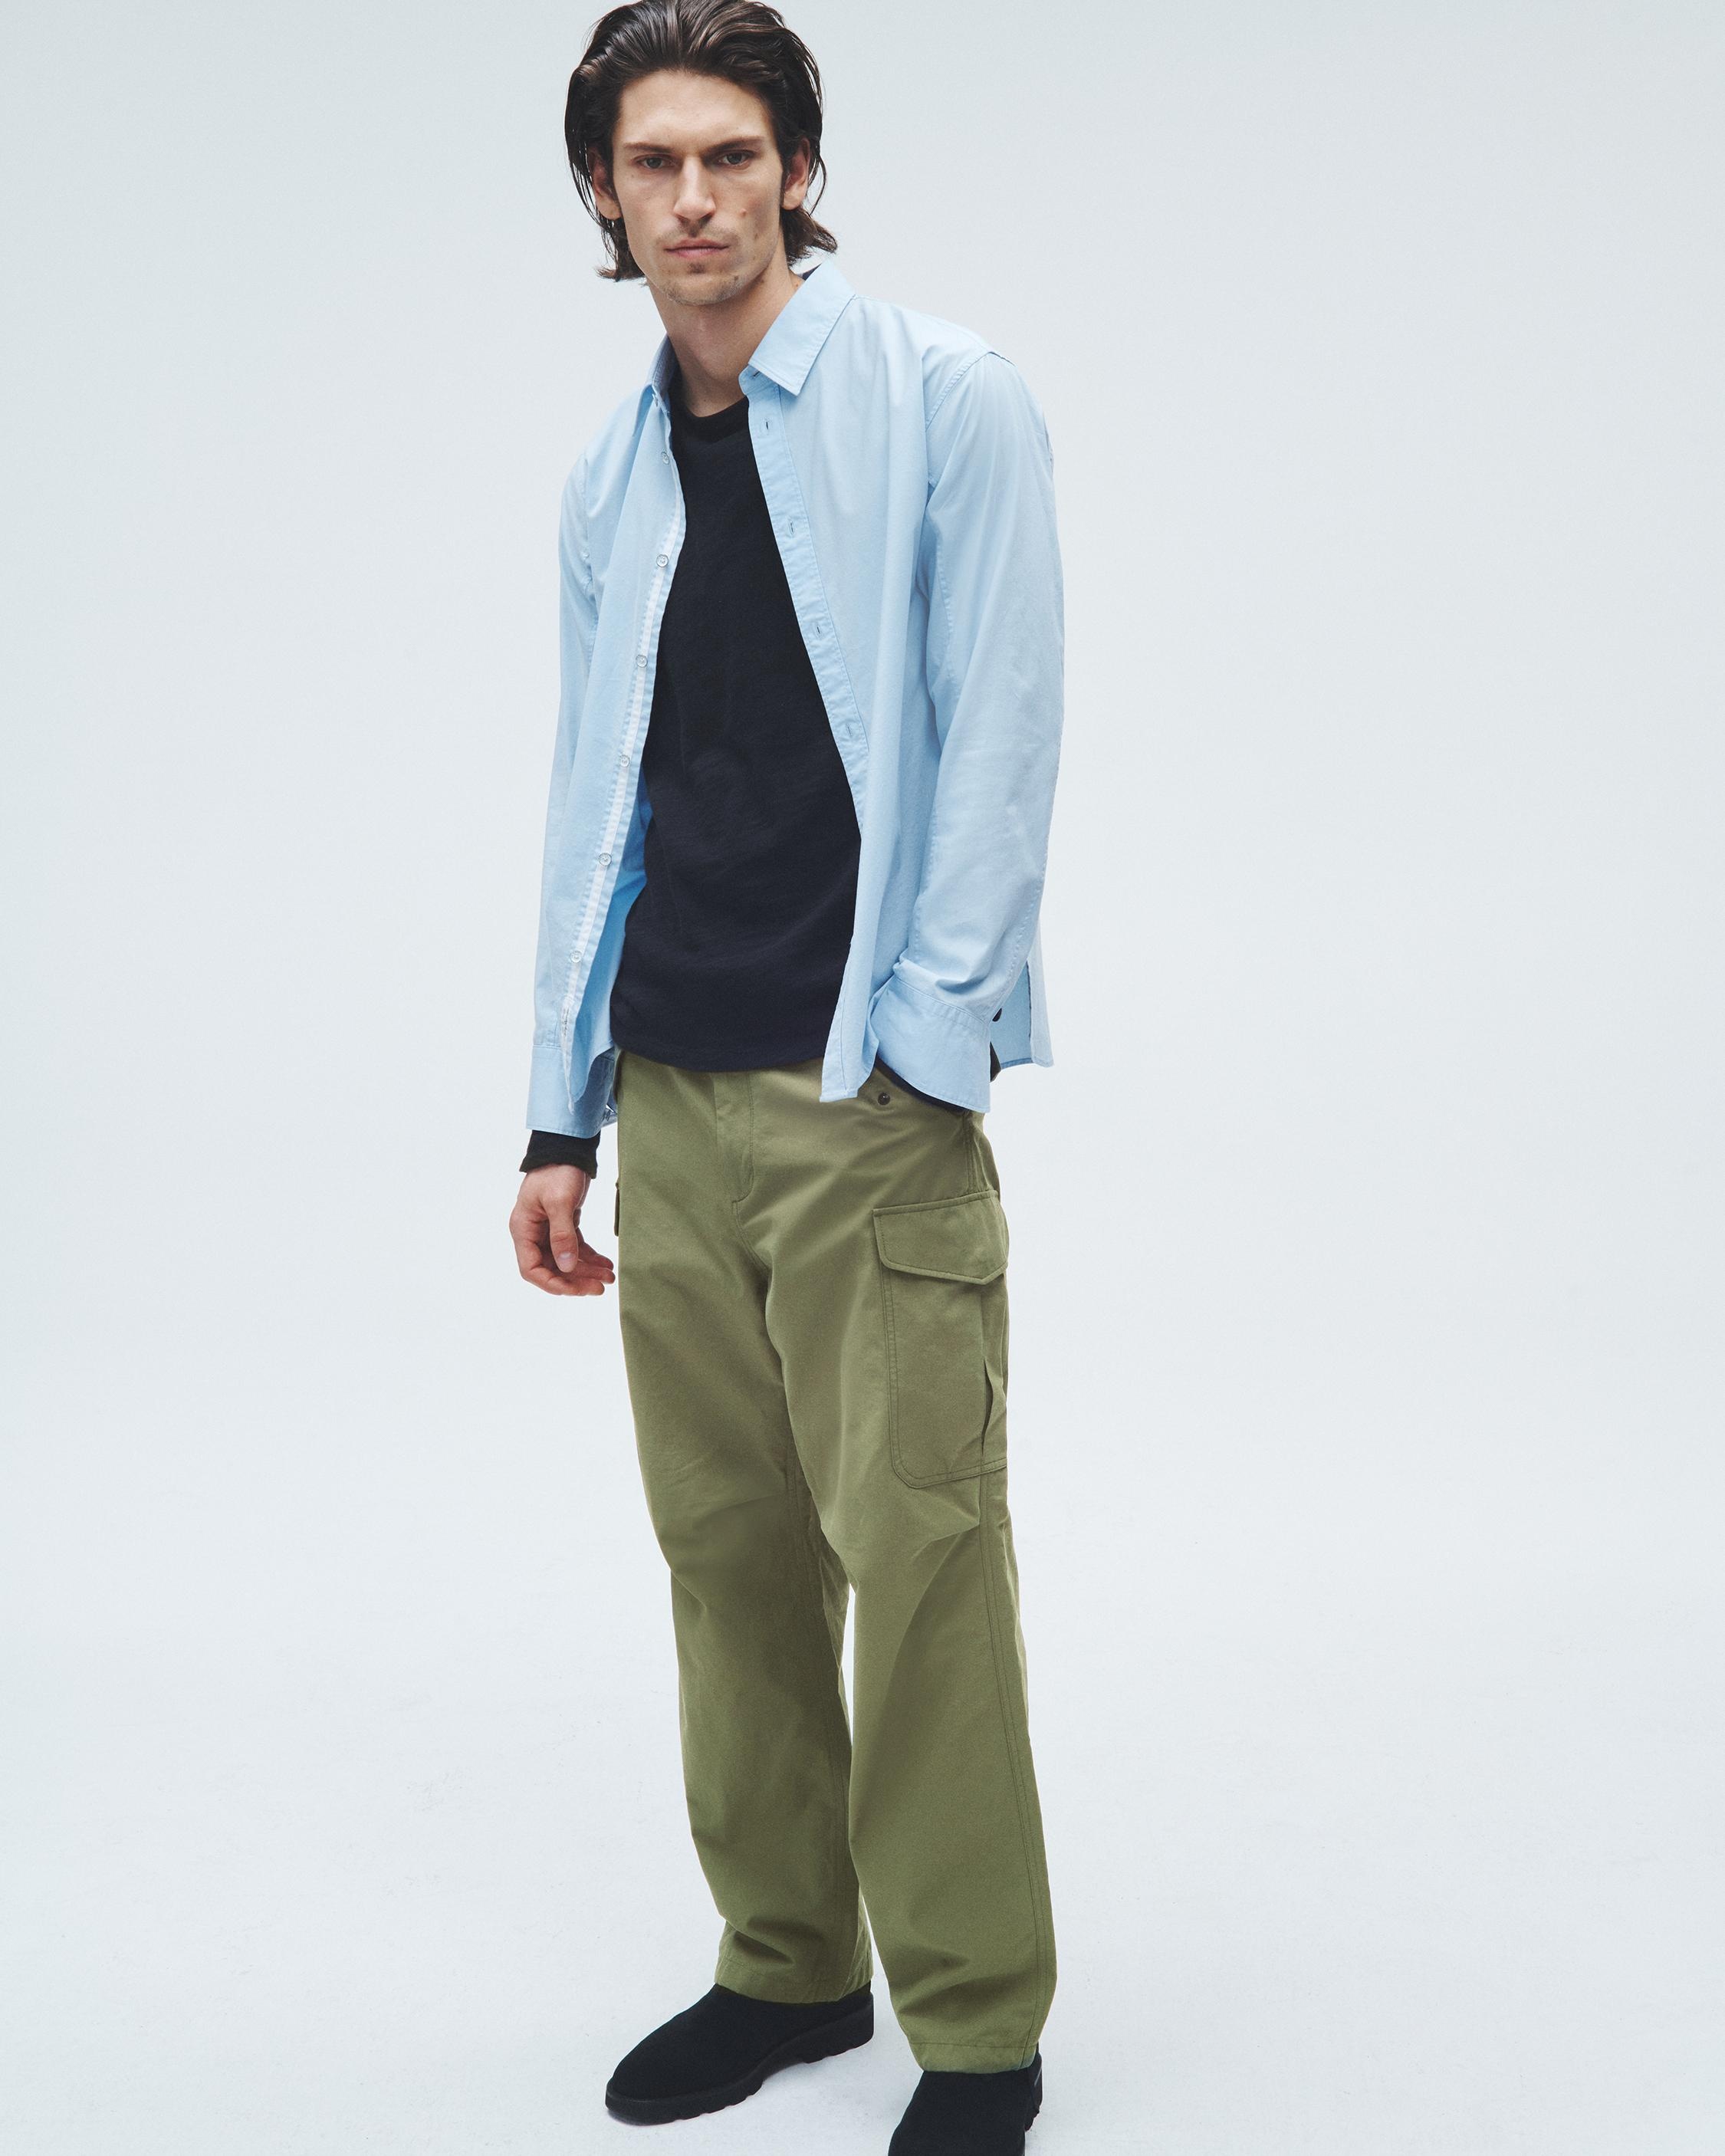 Surplus Nylon Cargo Pant
Relaxed Fit - 2